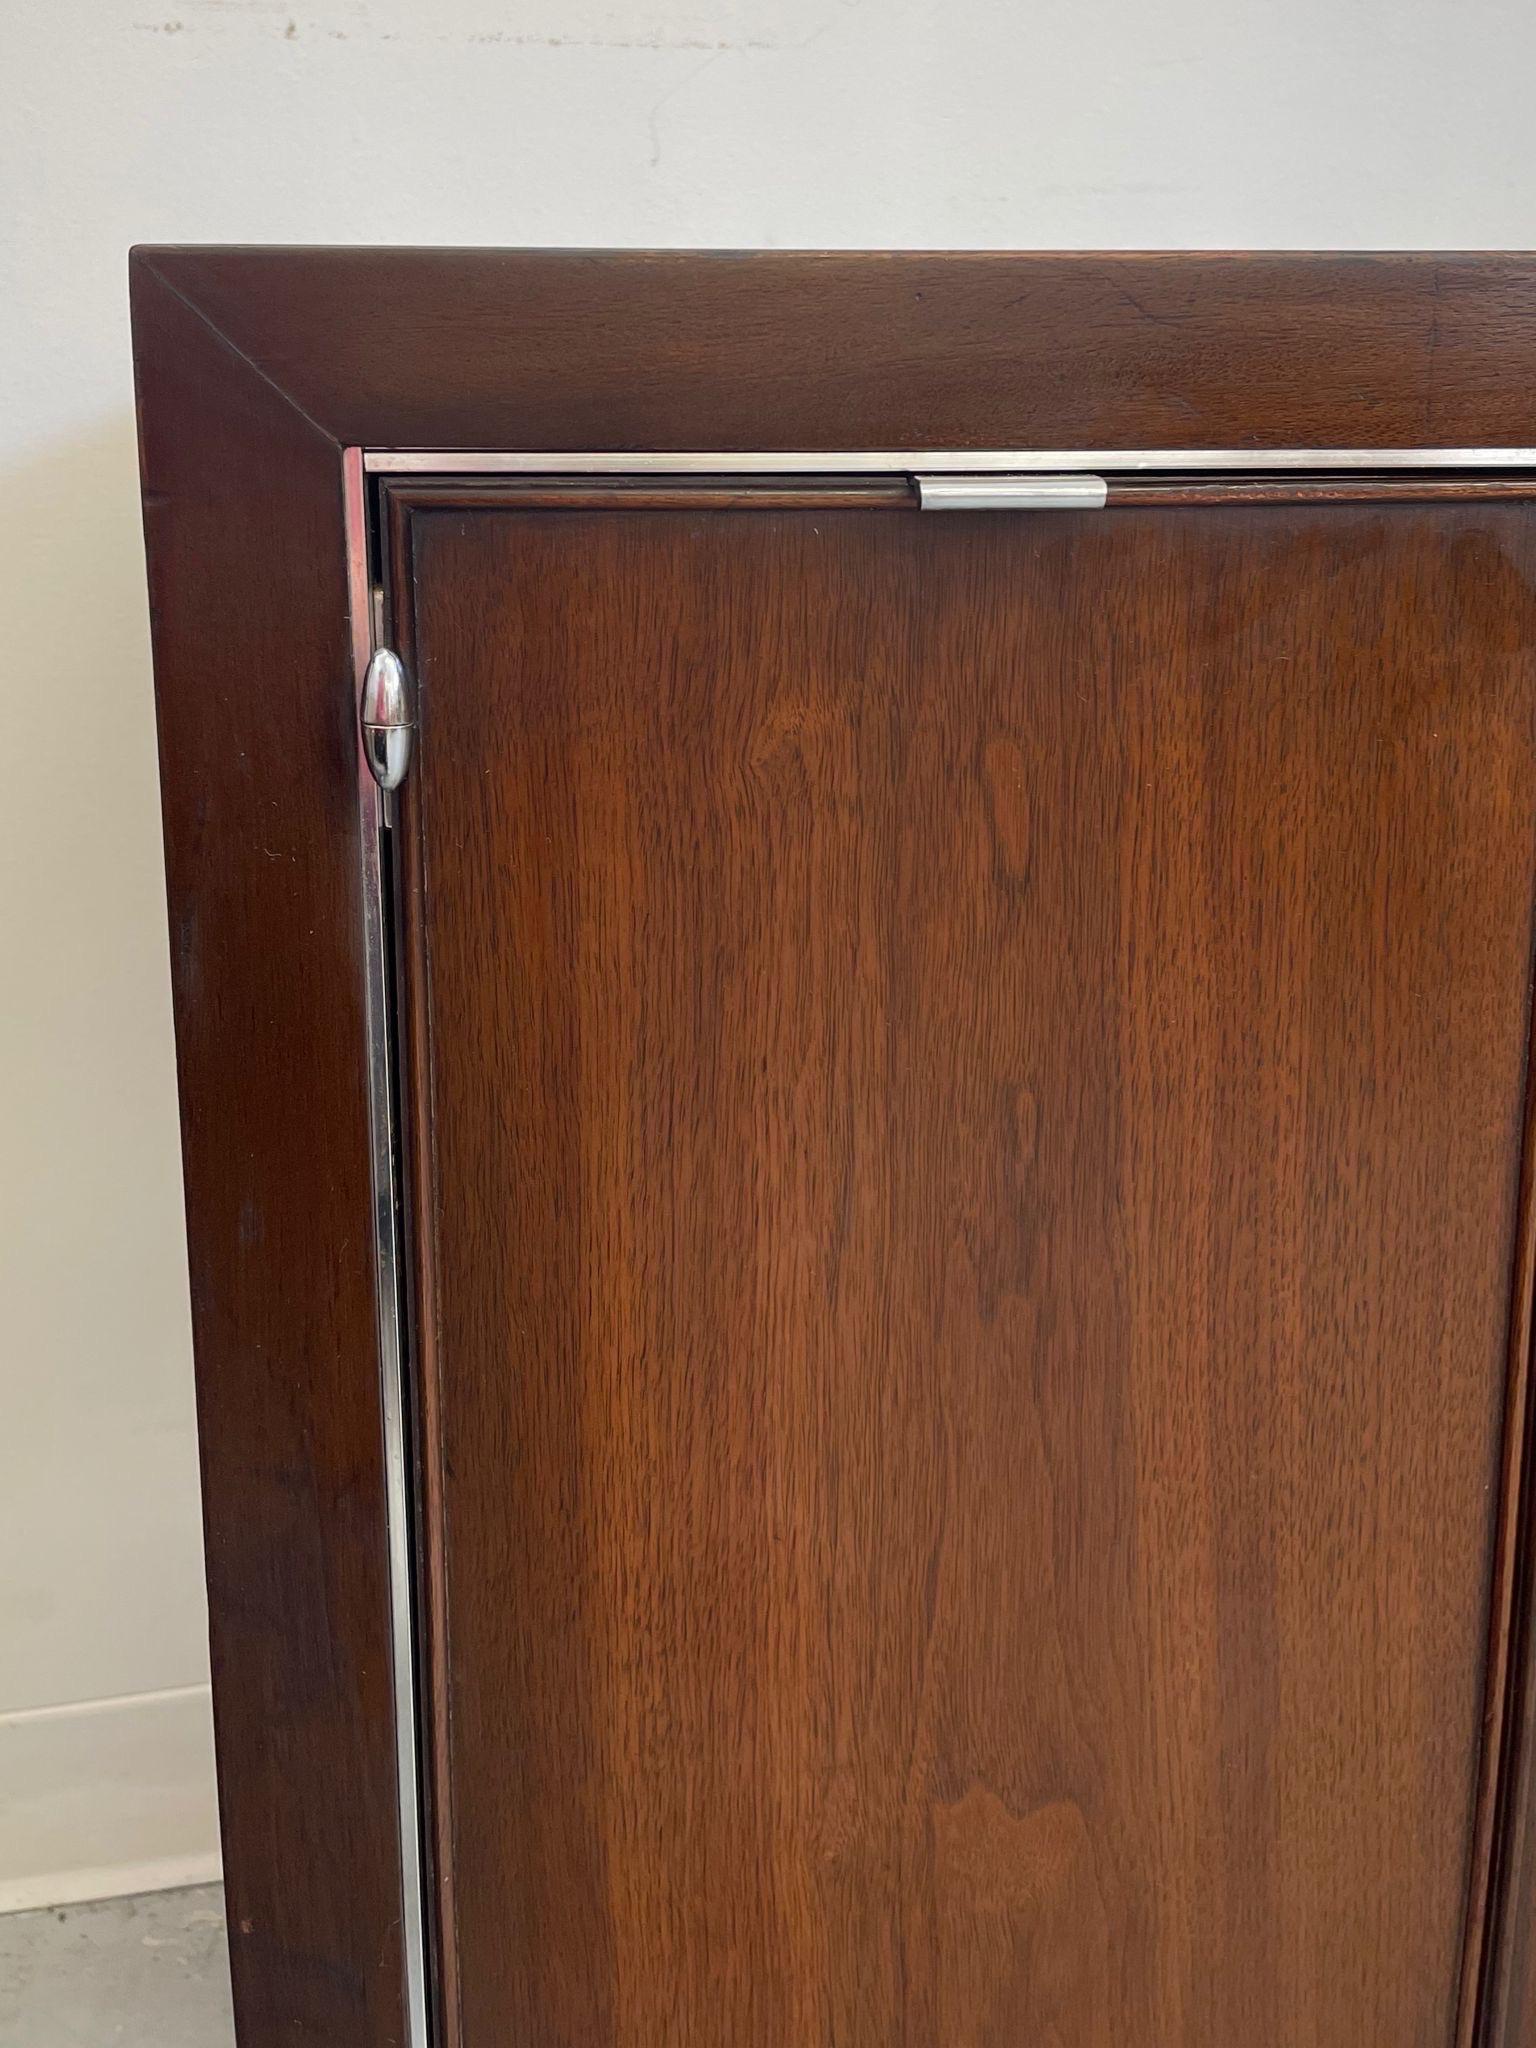 Late 20th Century Vintage Mid Century Modern Drexel Credenza Cabinet With Chrome Toned Hardware. For Sale